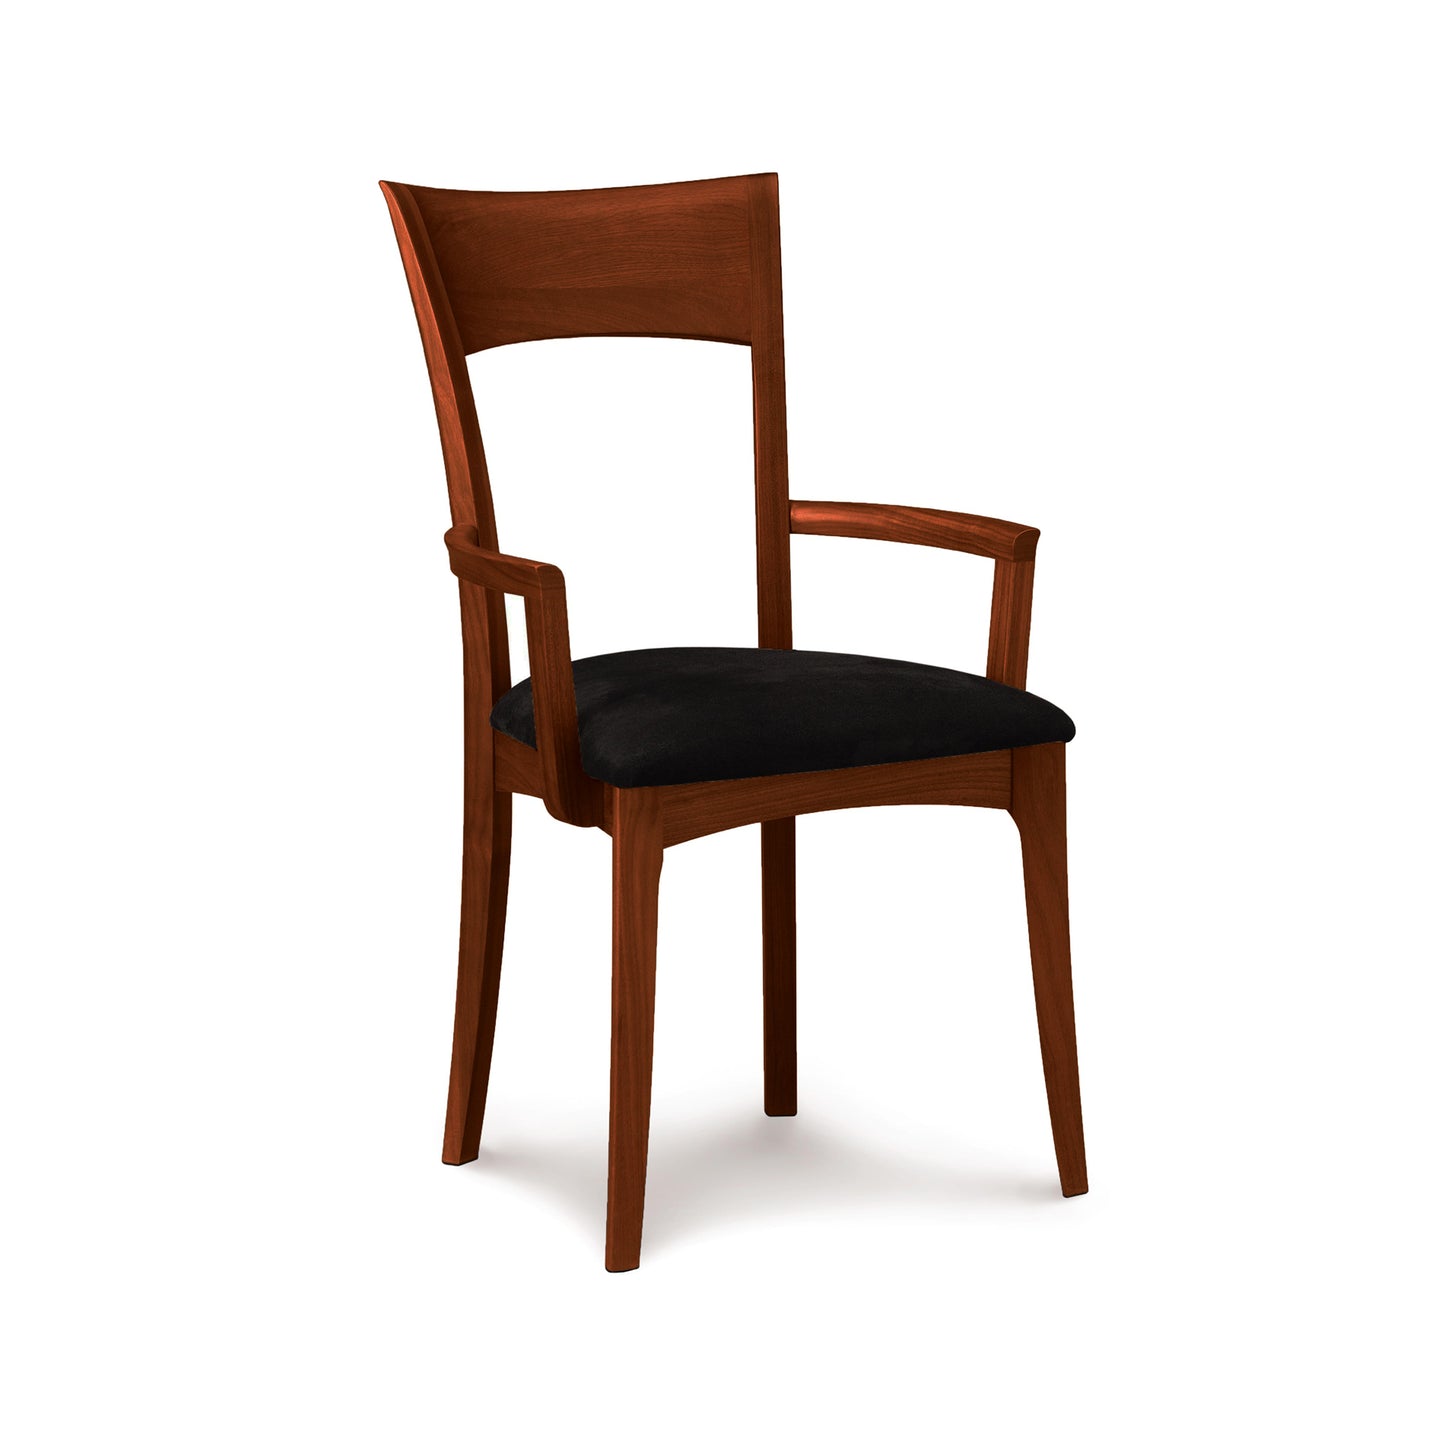 A solid American cherry wood Ingrid Chair by Copeland Furniture with armrests and a black upholstered seat against a white background.